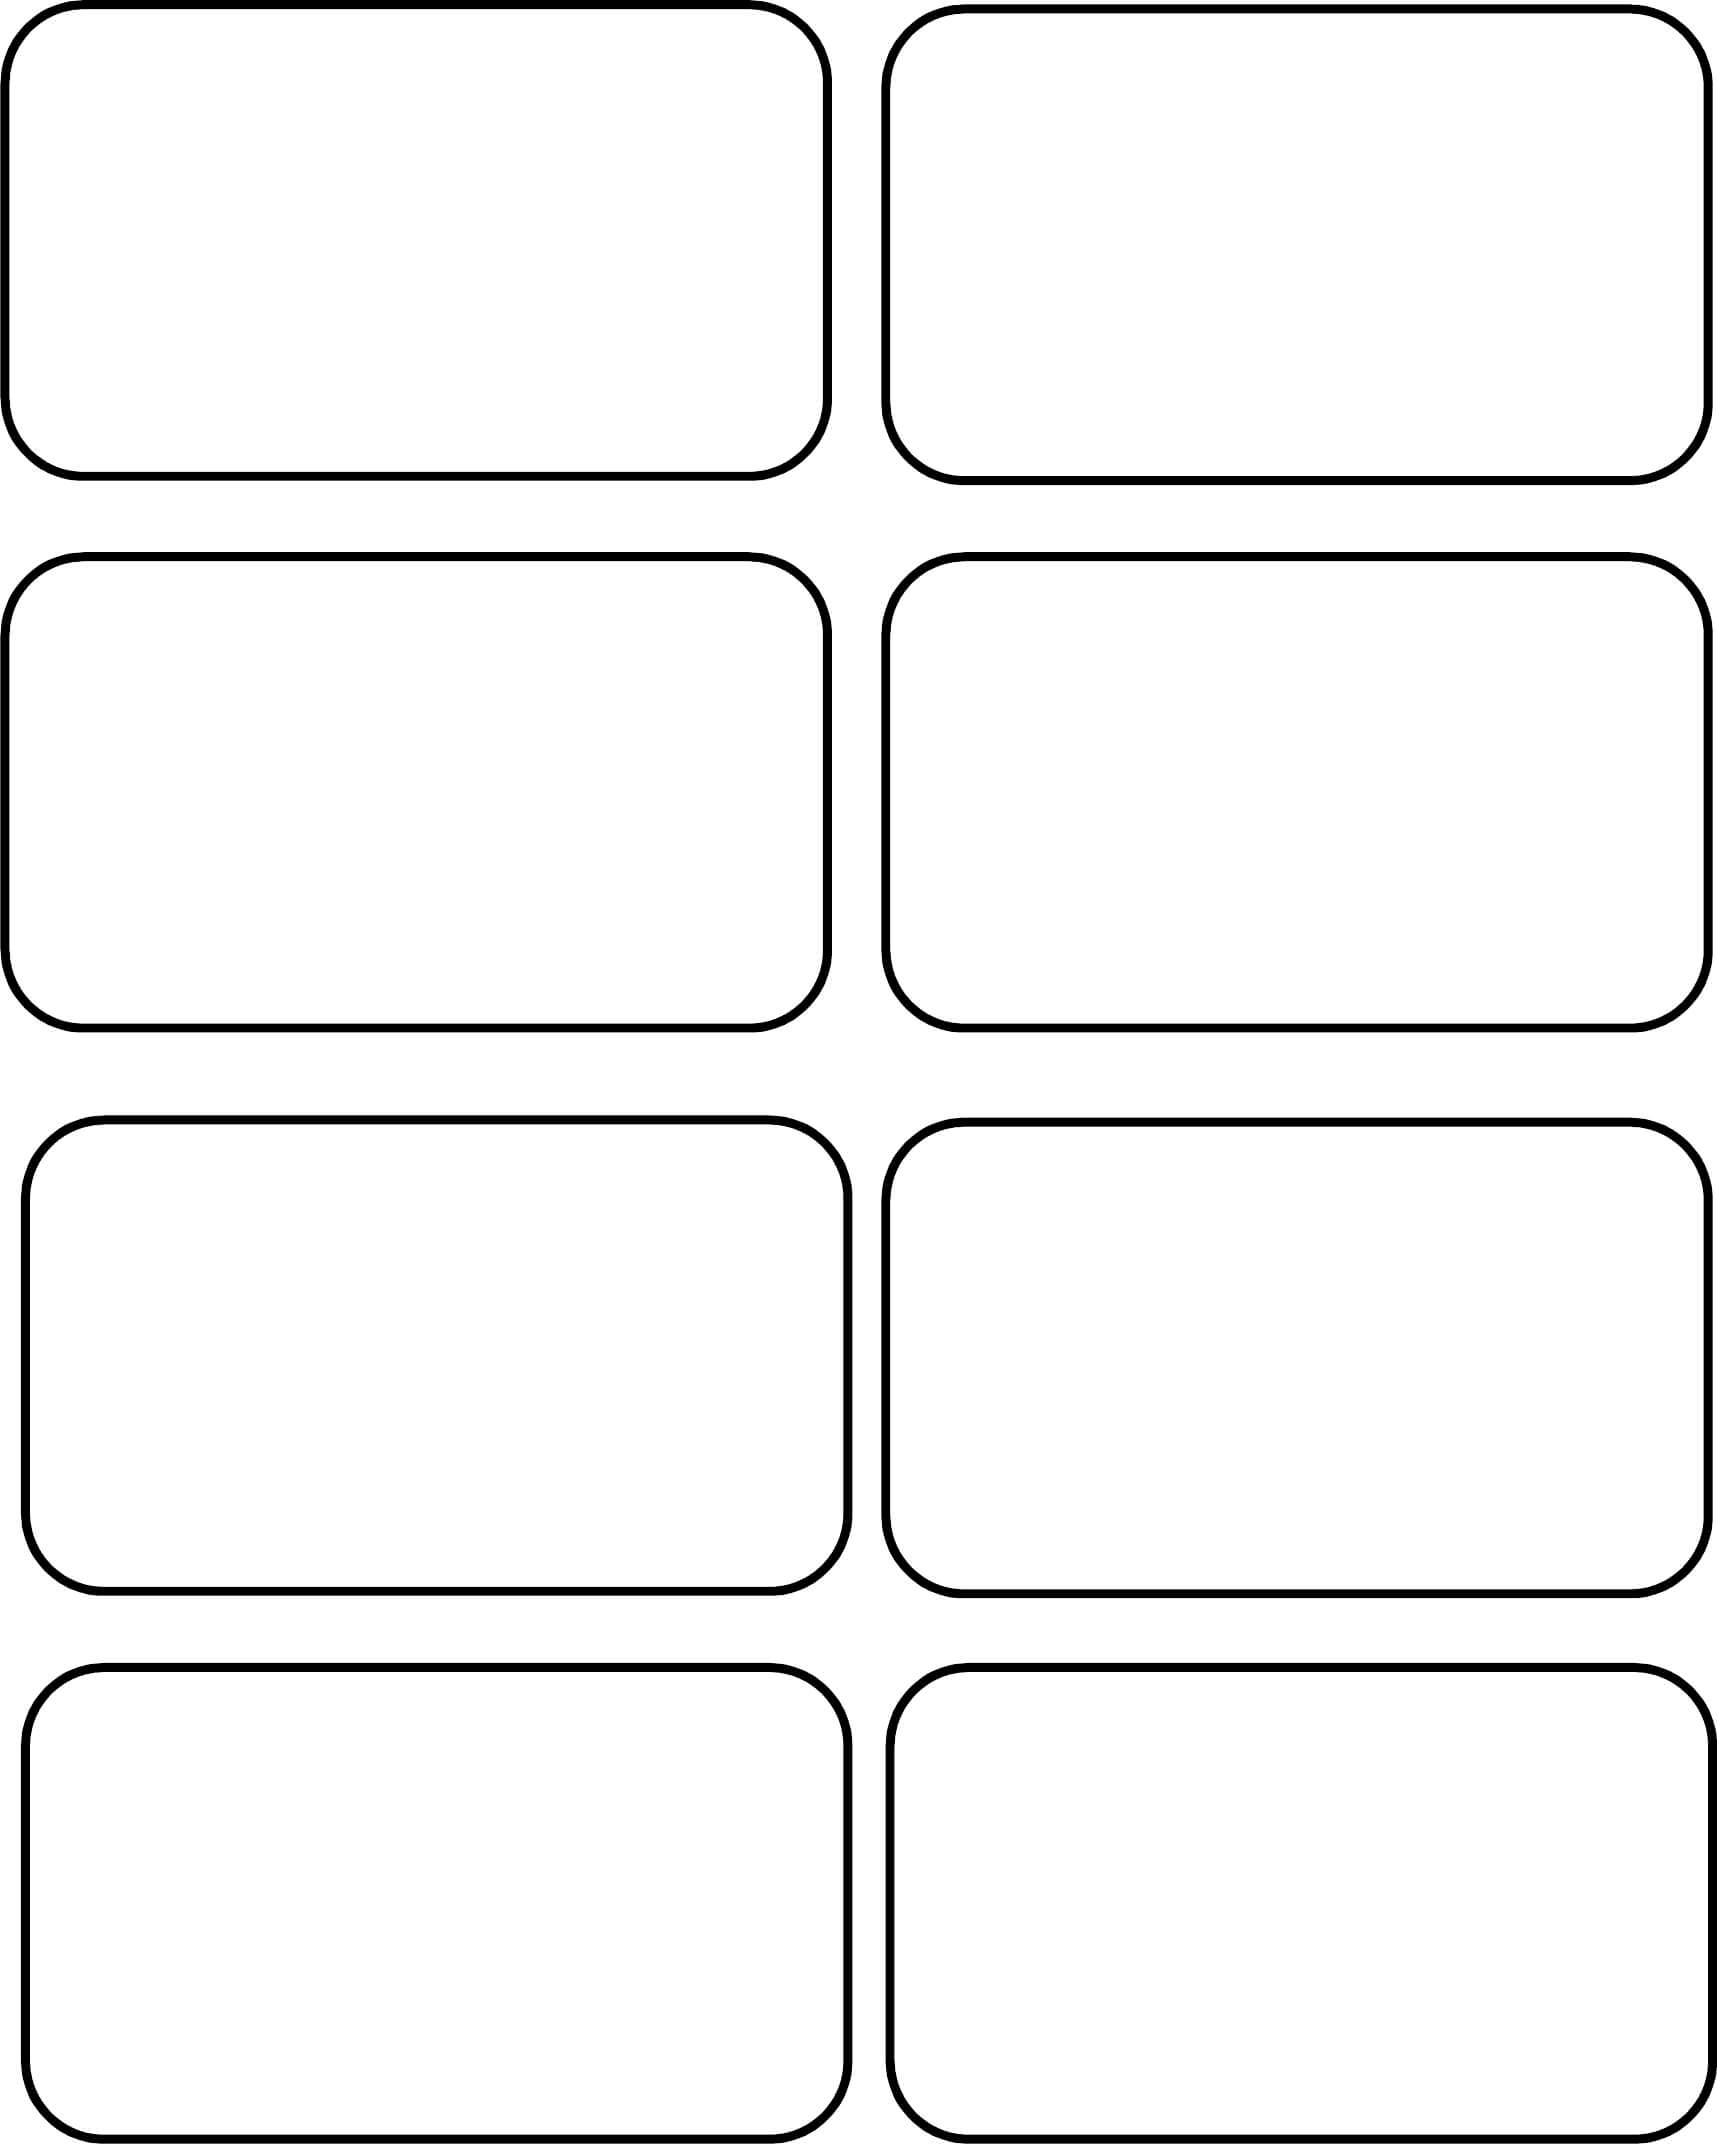 Printable Luggage Tag Templates | Download Them Or Print Within Blank Luggage Tag Template